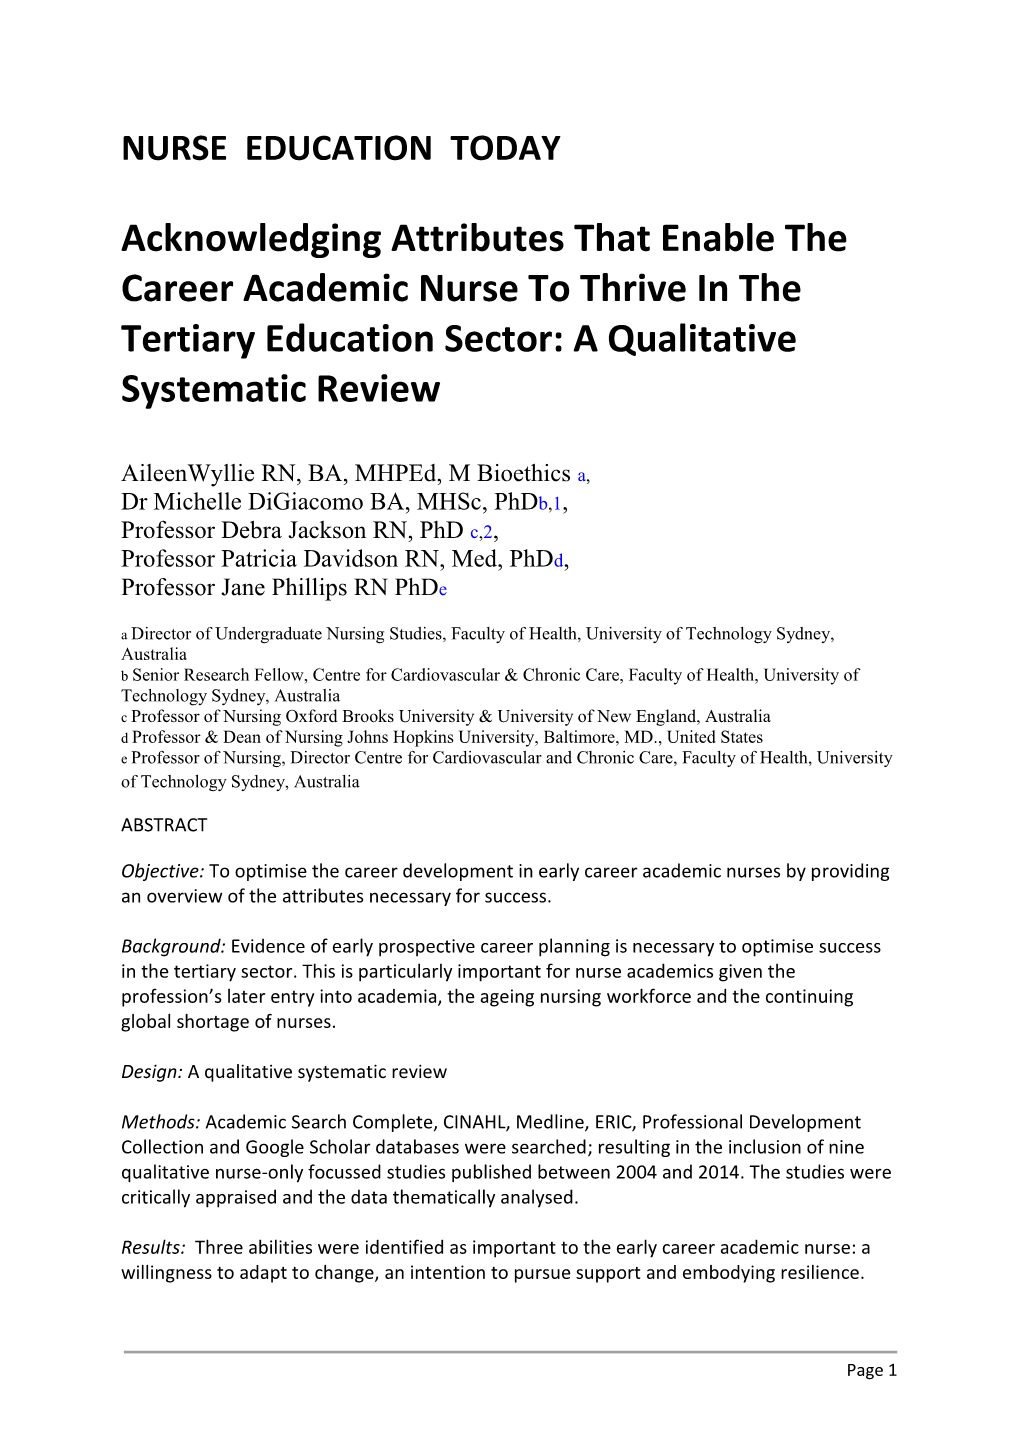 Acknowledging Attributes That Enable the Career Academic Nurse to Thrive in the Tertiary Education Sector: a Qualitative Systematic Review